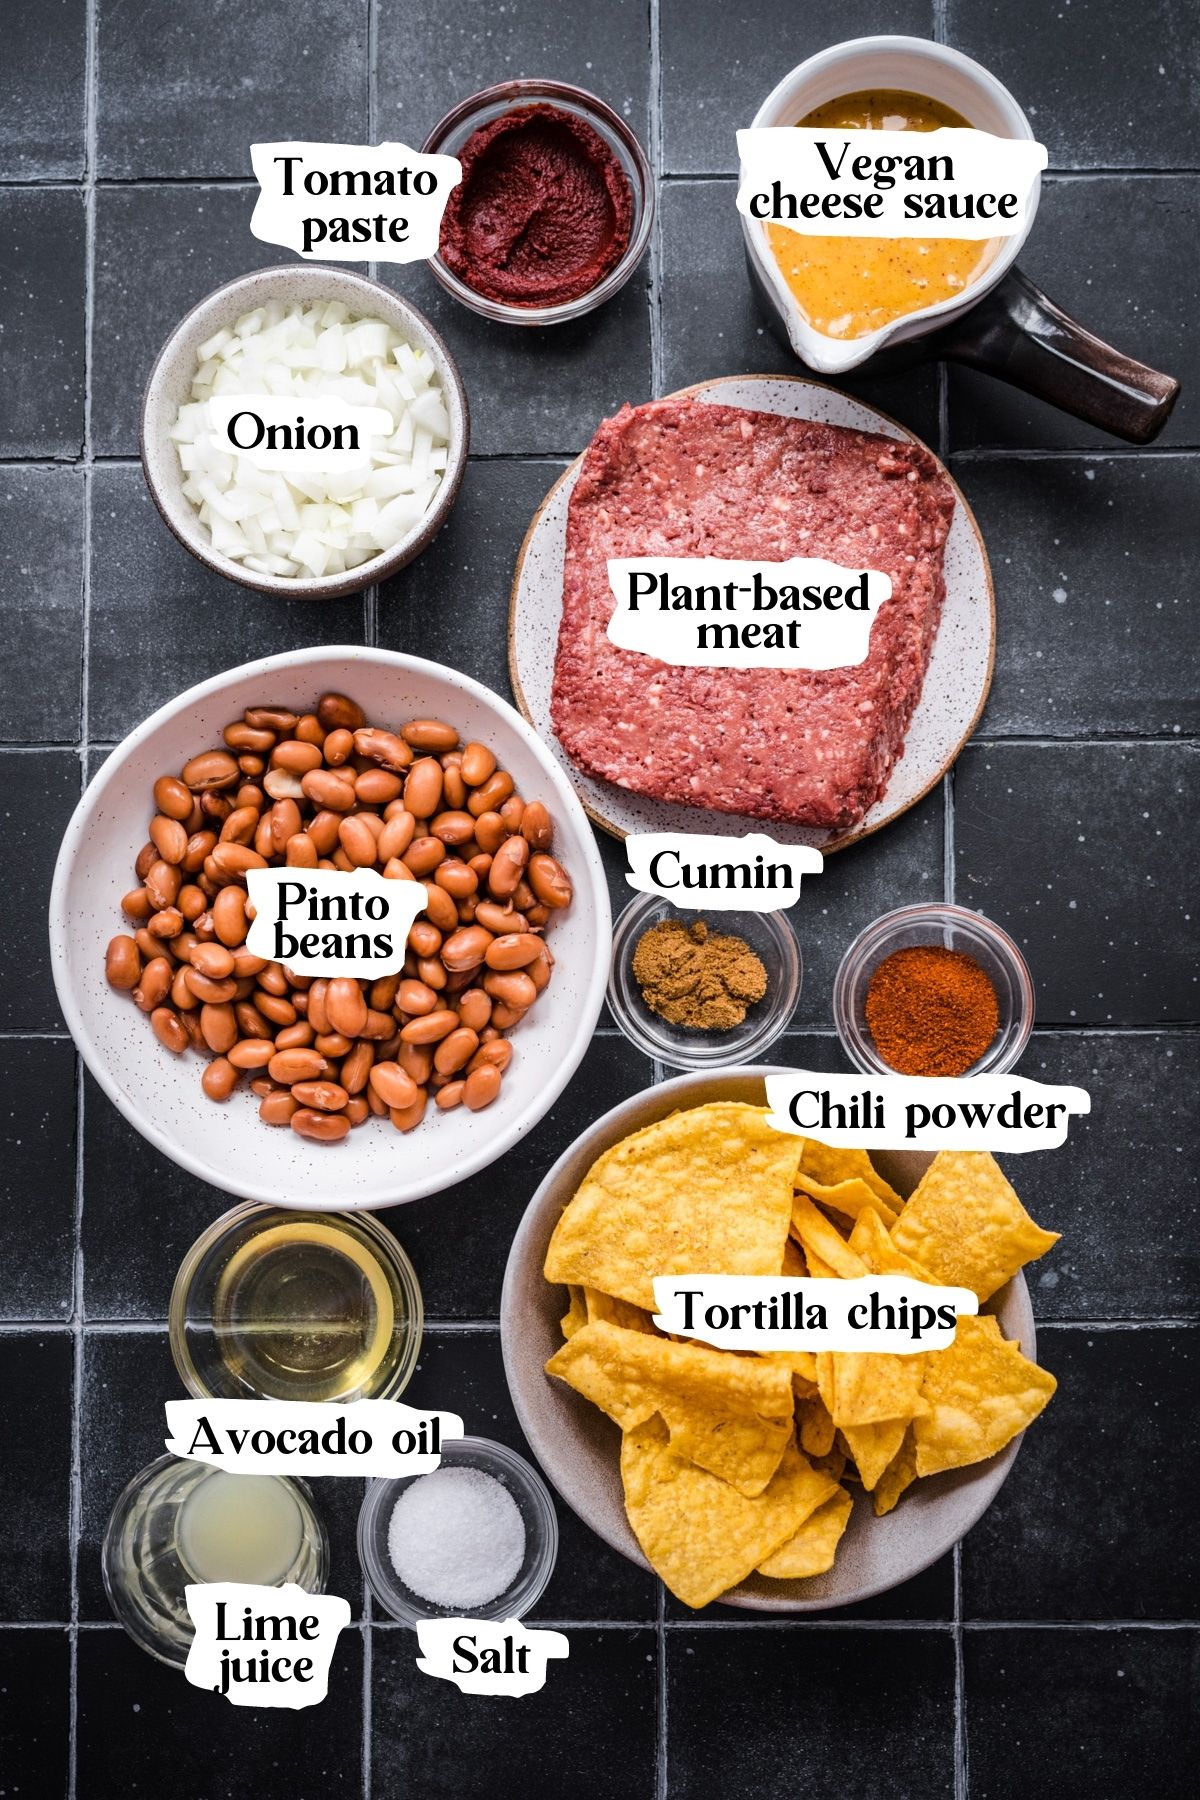 Overhead view of vegan nacho ingredients, including beans and plant-based meat.